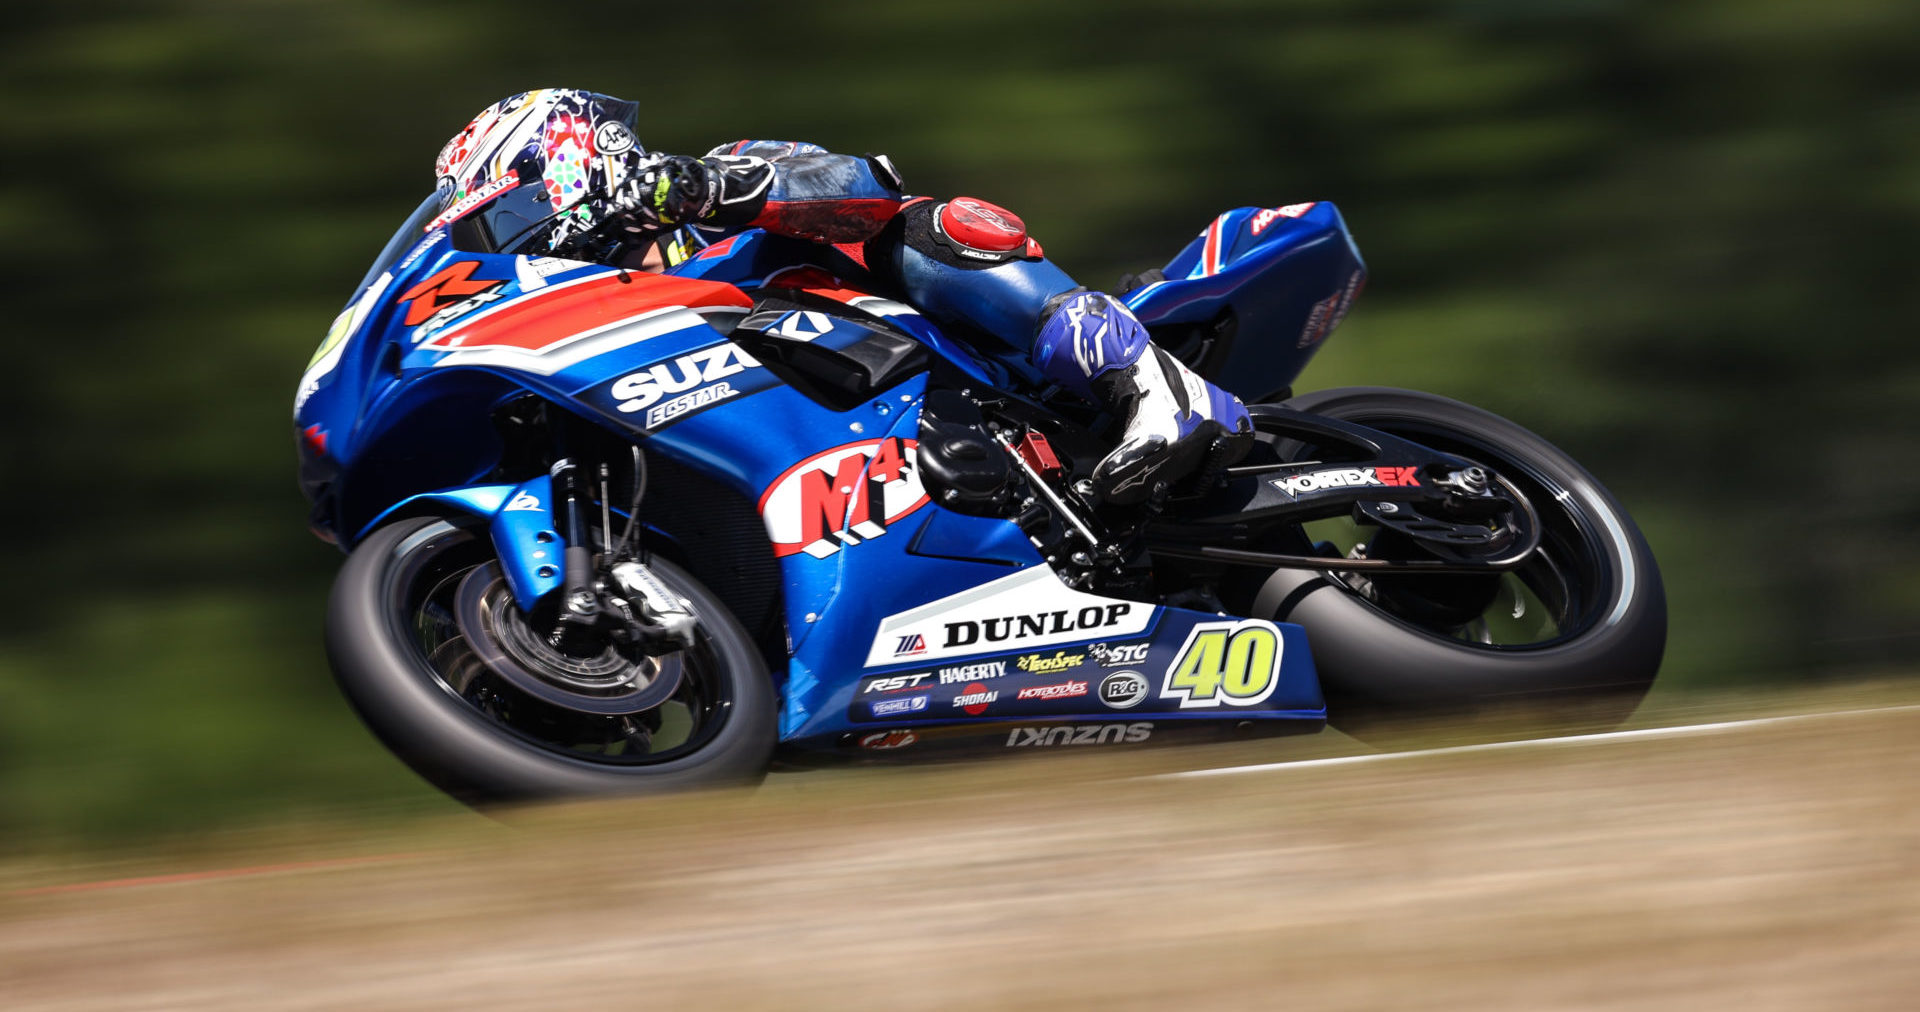 M4 ECSTAR Suzuki's Sean Dylan Kelly (40) comes to the GEICO Motorcycle Superbike Speedfest with a 21-point lead over his rival Richie Escalante in the 2021 MotoAmerica Supersport Championship. Photo by Brian J. Nelson, courtesy MotoAmerica.